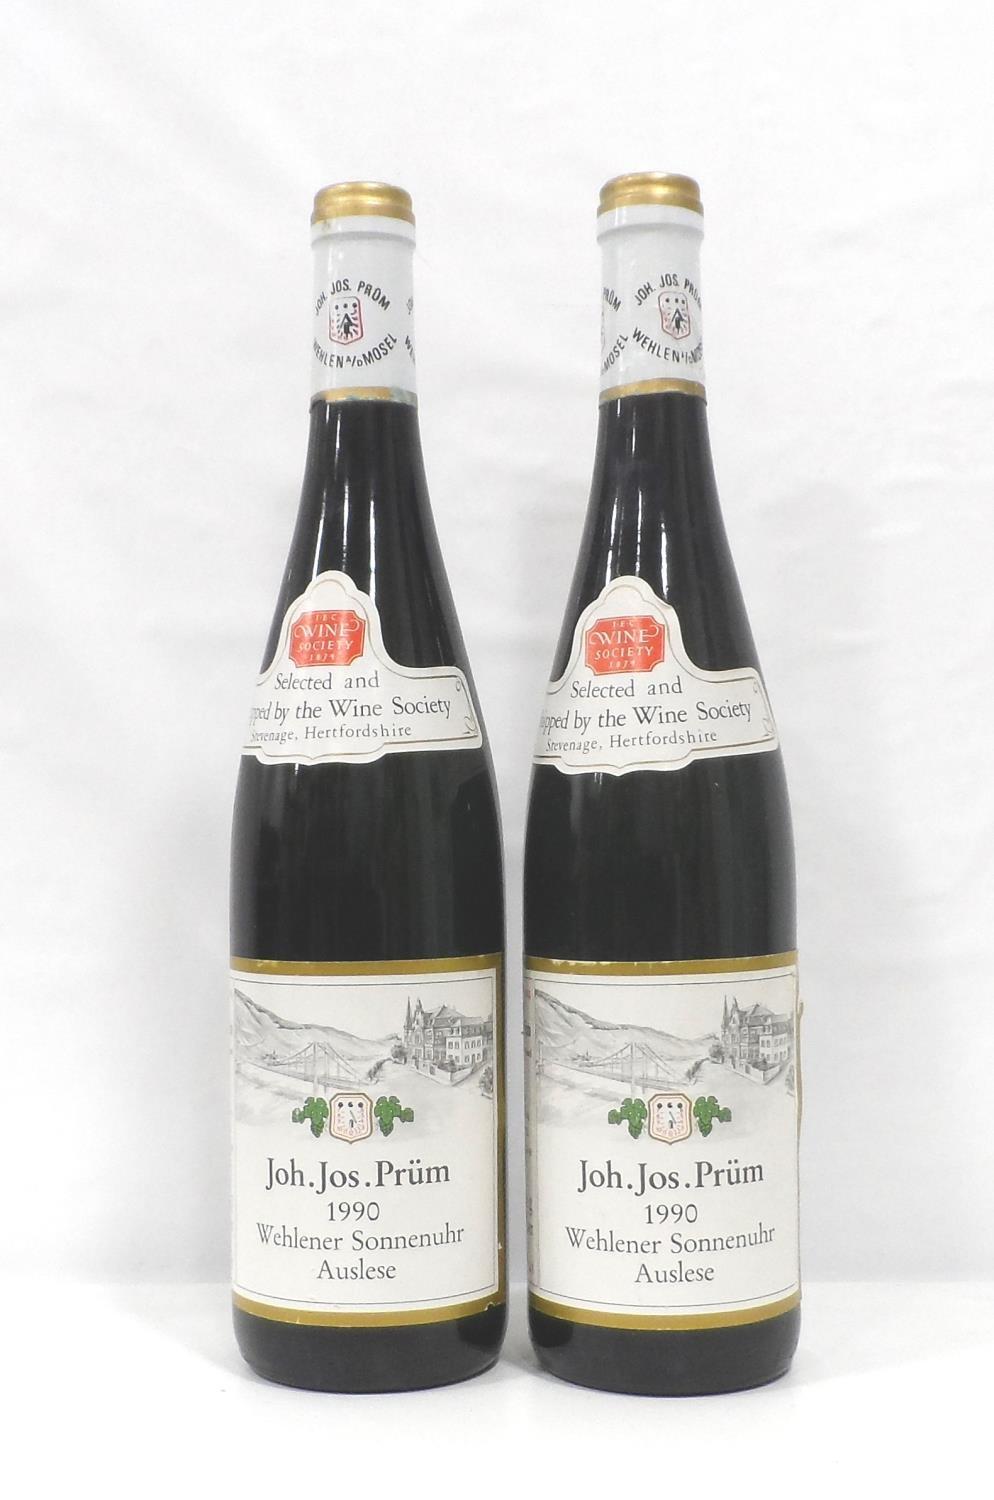 JOH.JOS. PRUM WEHLENER SONNENUHR AUSLESE 1990 A pair of rare bottles Selected and Shipped by The